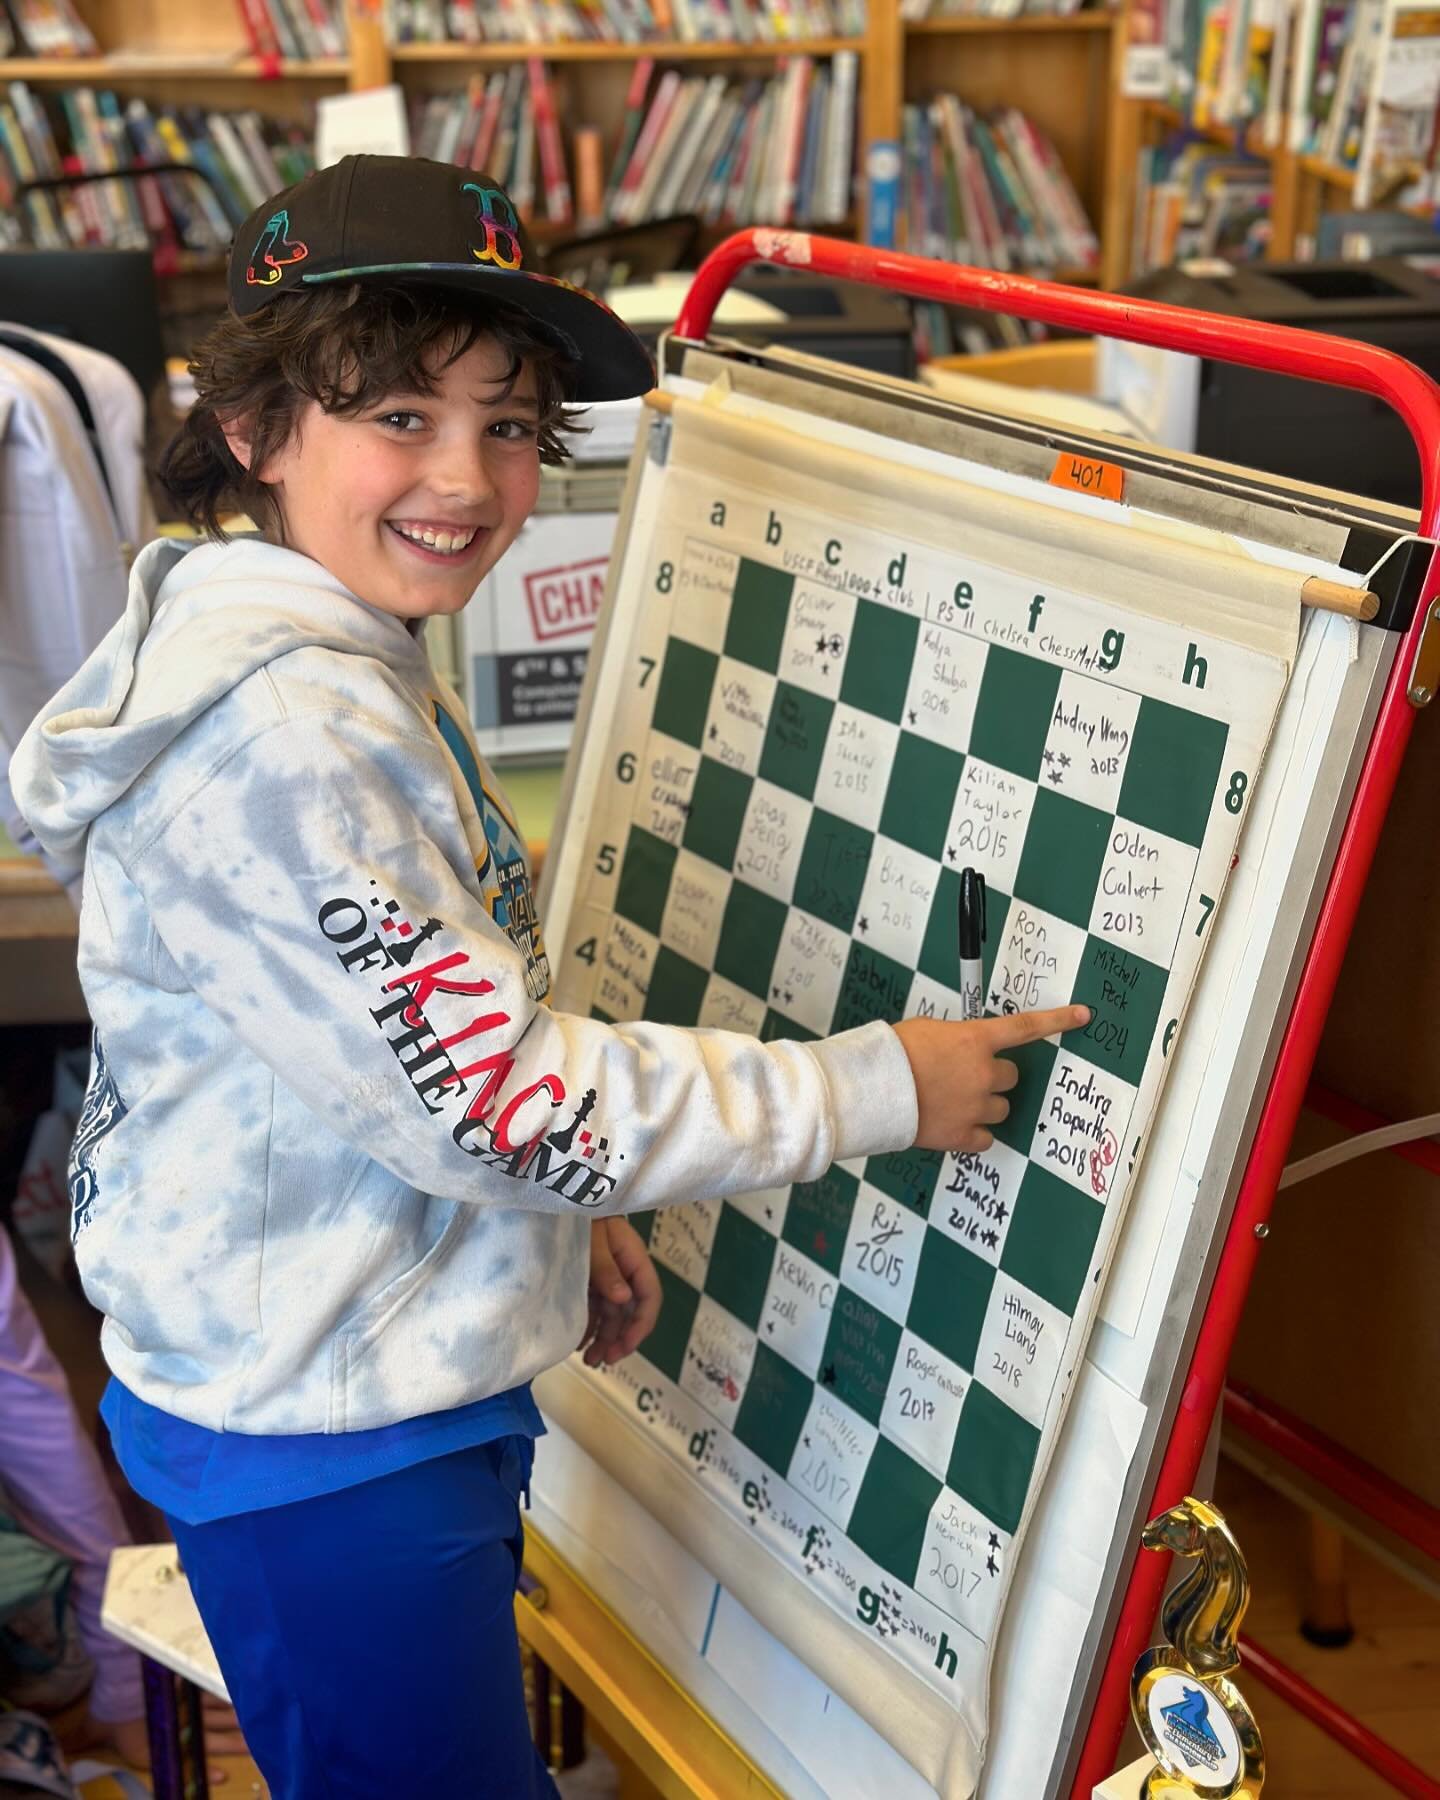 Join us in congratulating Mitchell on breaking 1000 USCF! Mitchell was indicted into the PS 11 Hall of fame today! #ps11chess #chelseachessmates #1000plususcf #nationalslegend